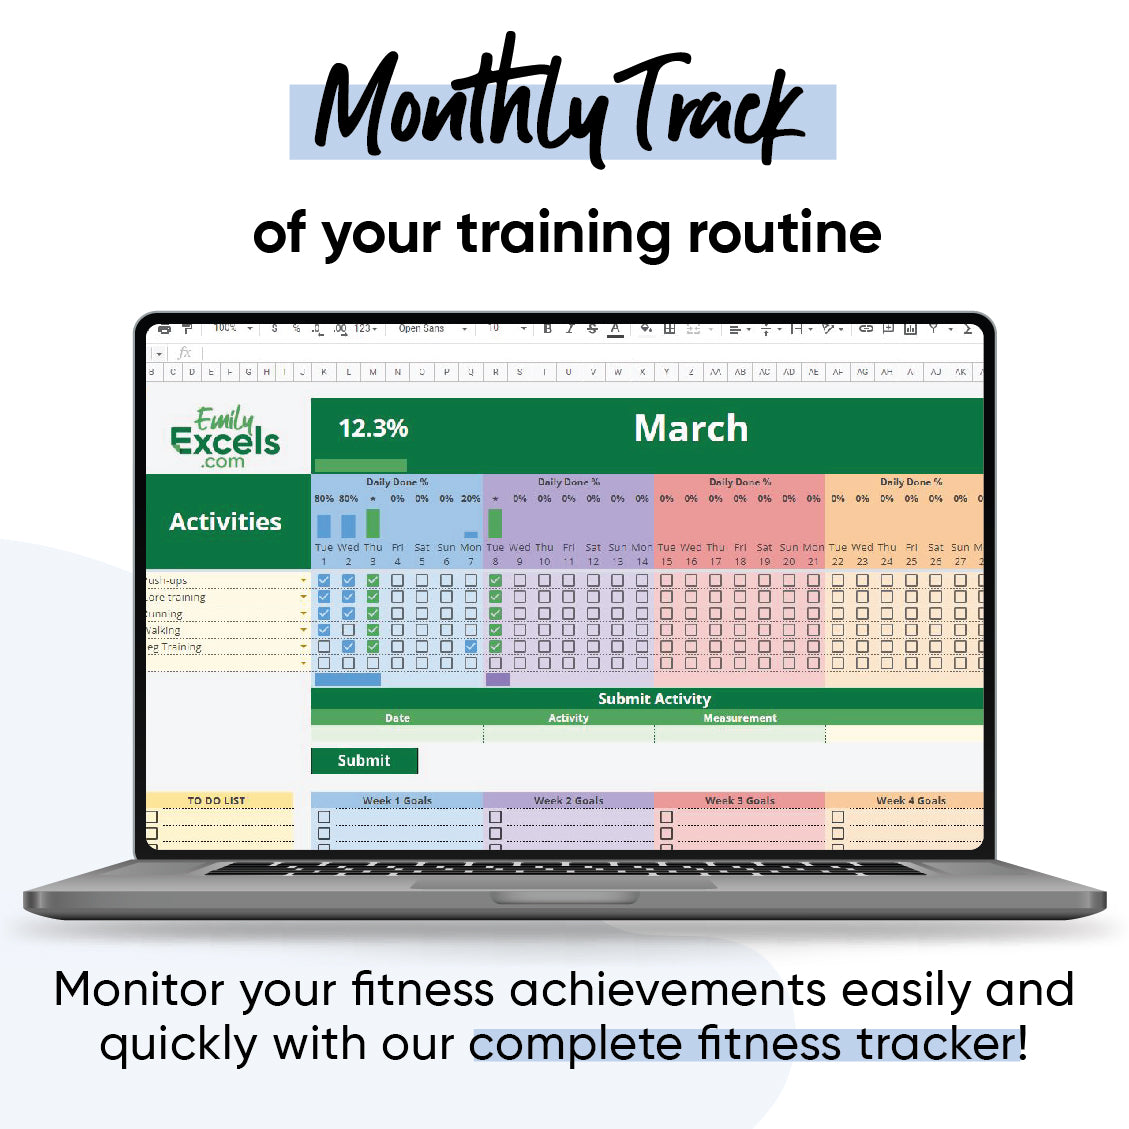 Ultimate Weight Loss & Fitness Tracker Spreadsheet - Lifetime Access & Instant Download